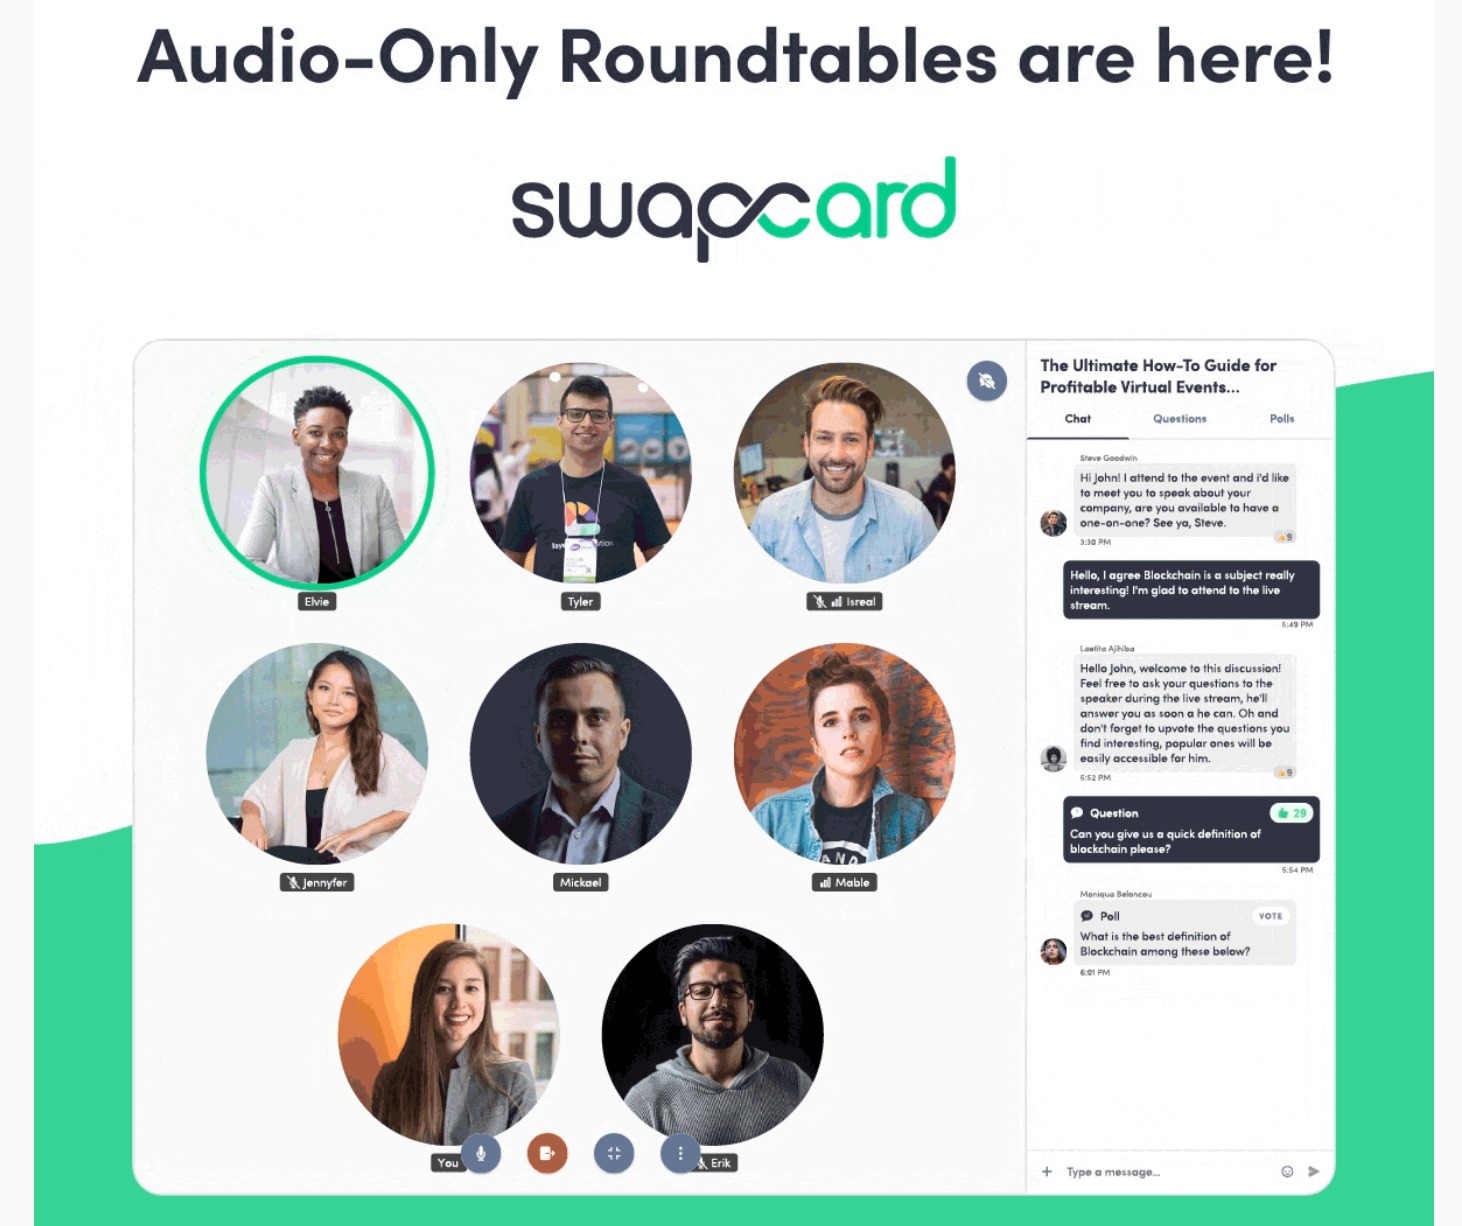 Audio-only Roundtable bei swapcard